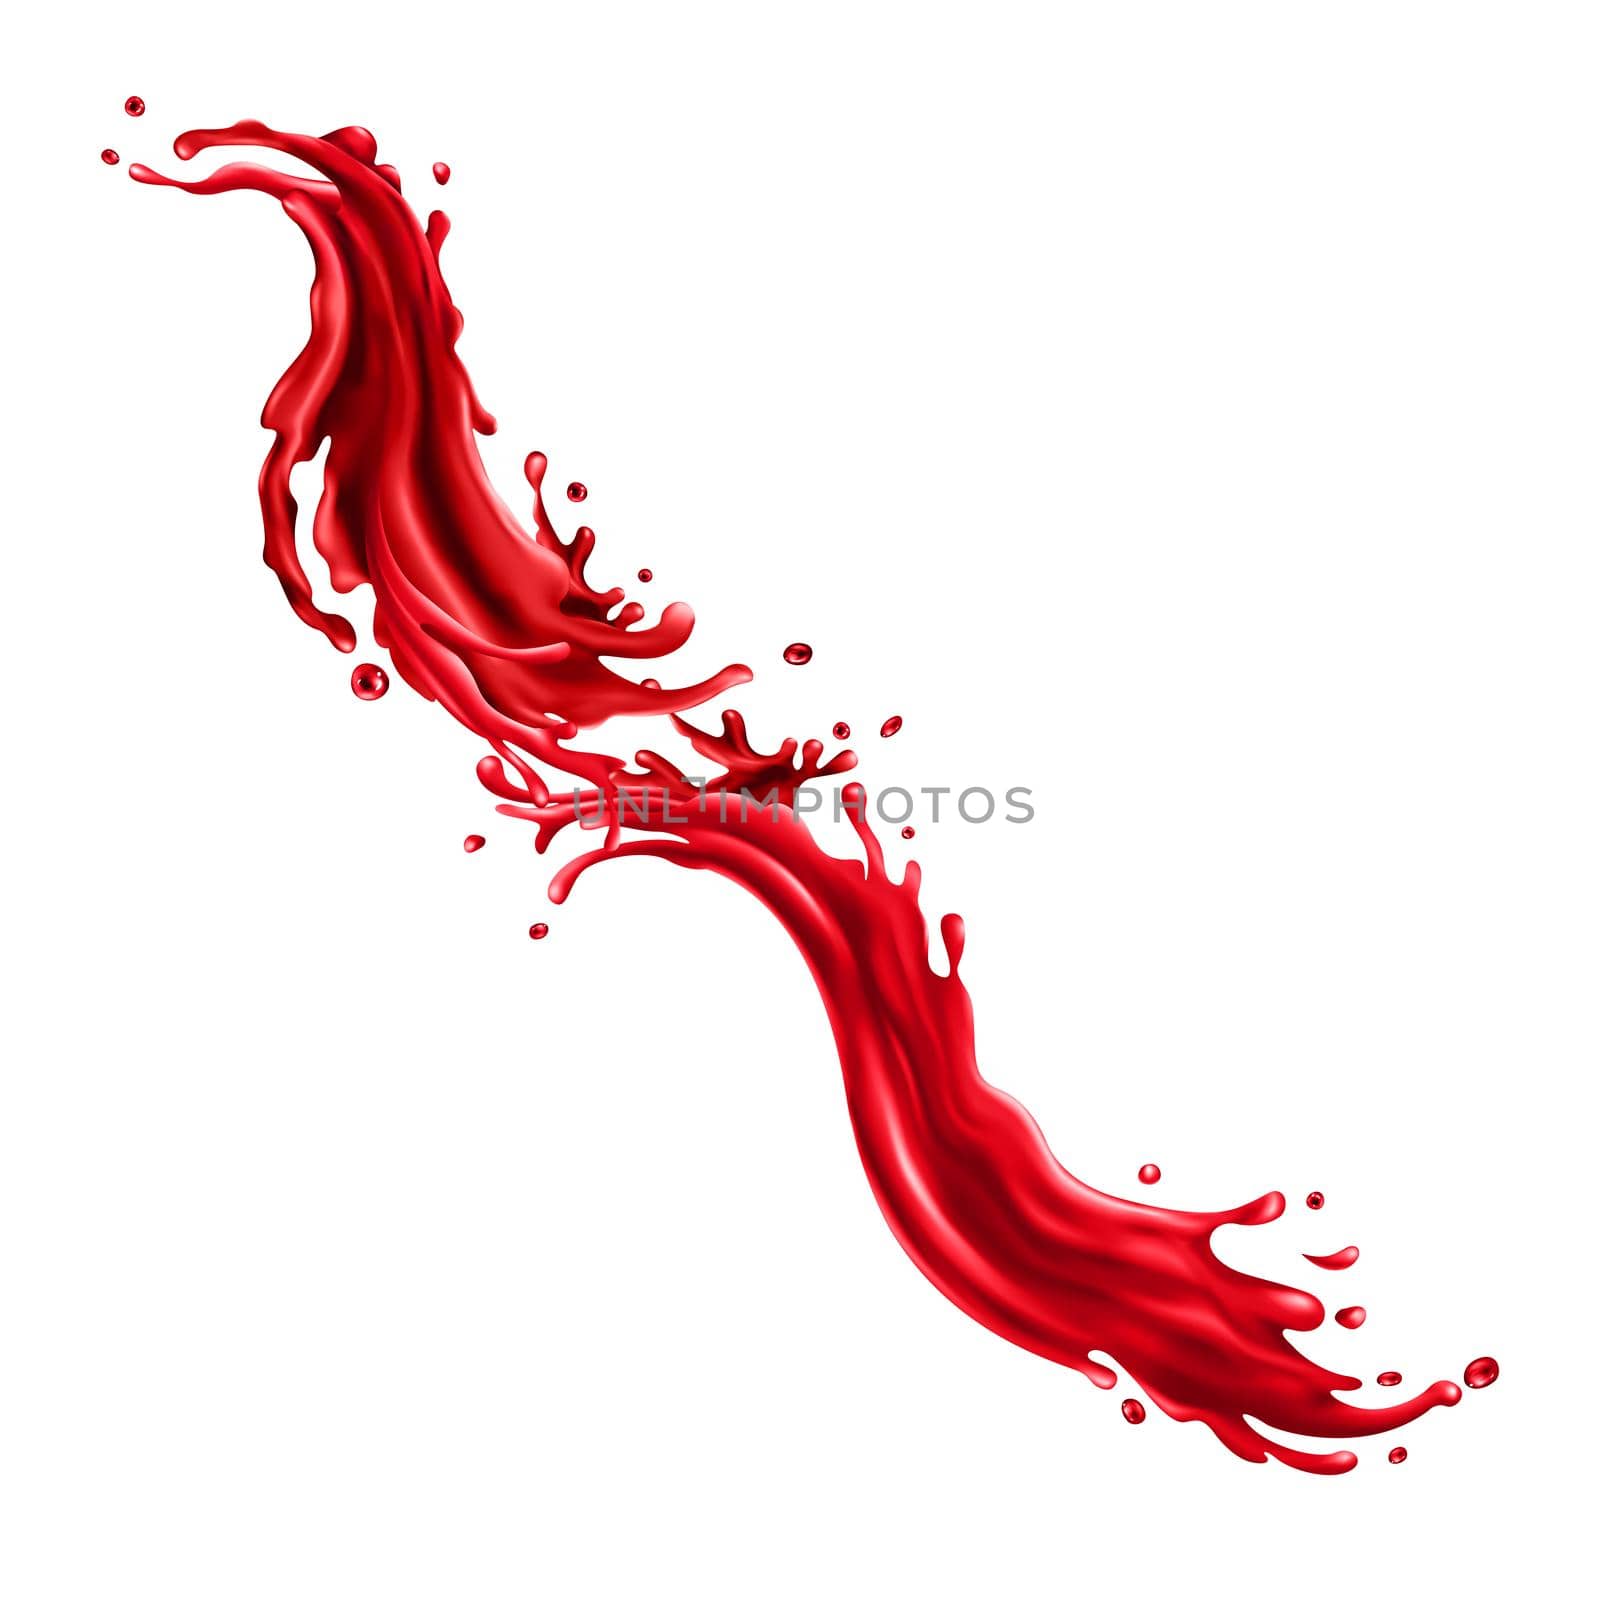 Cherry juice splashes on a white background by ConceptCafe